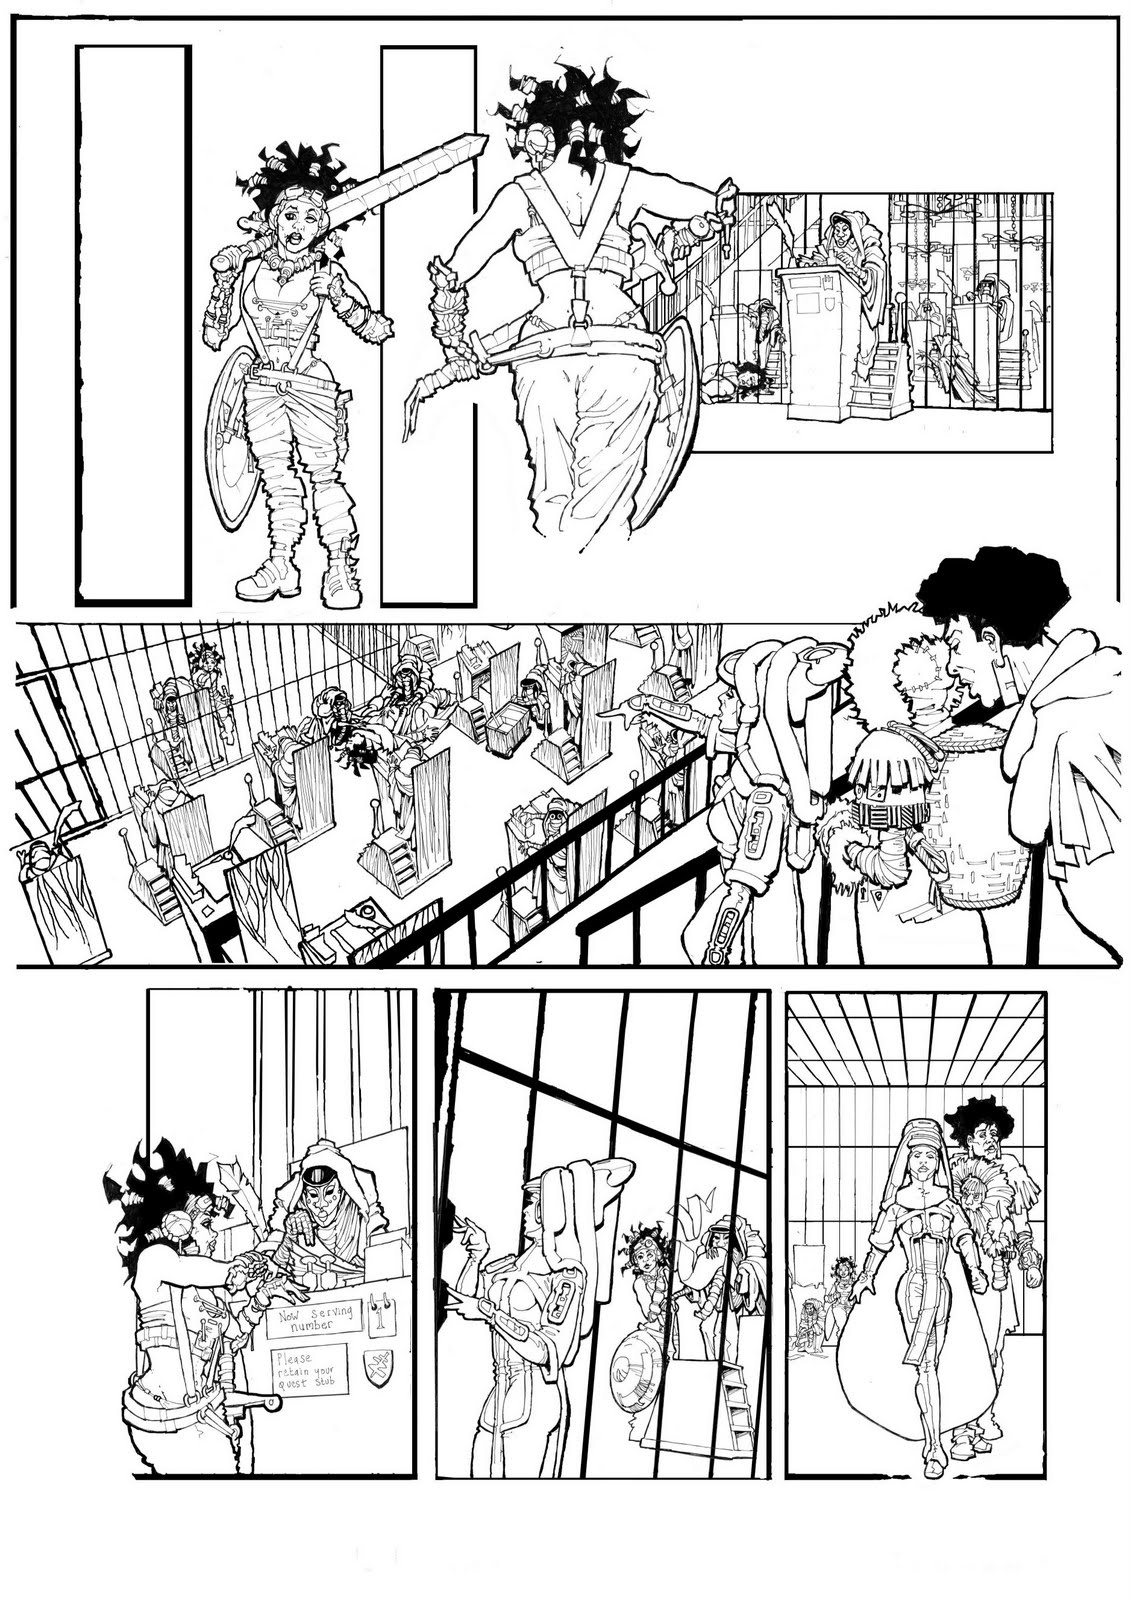 Crucible Page 2 - Early Inks by Smuzz